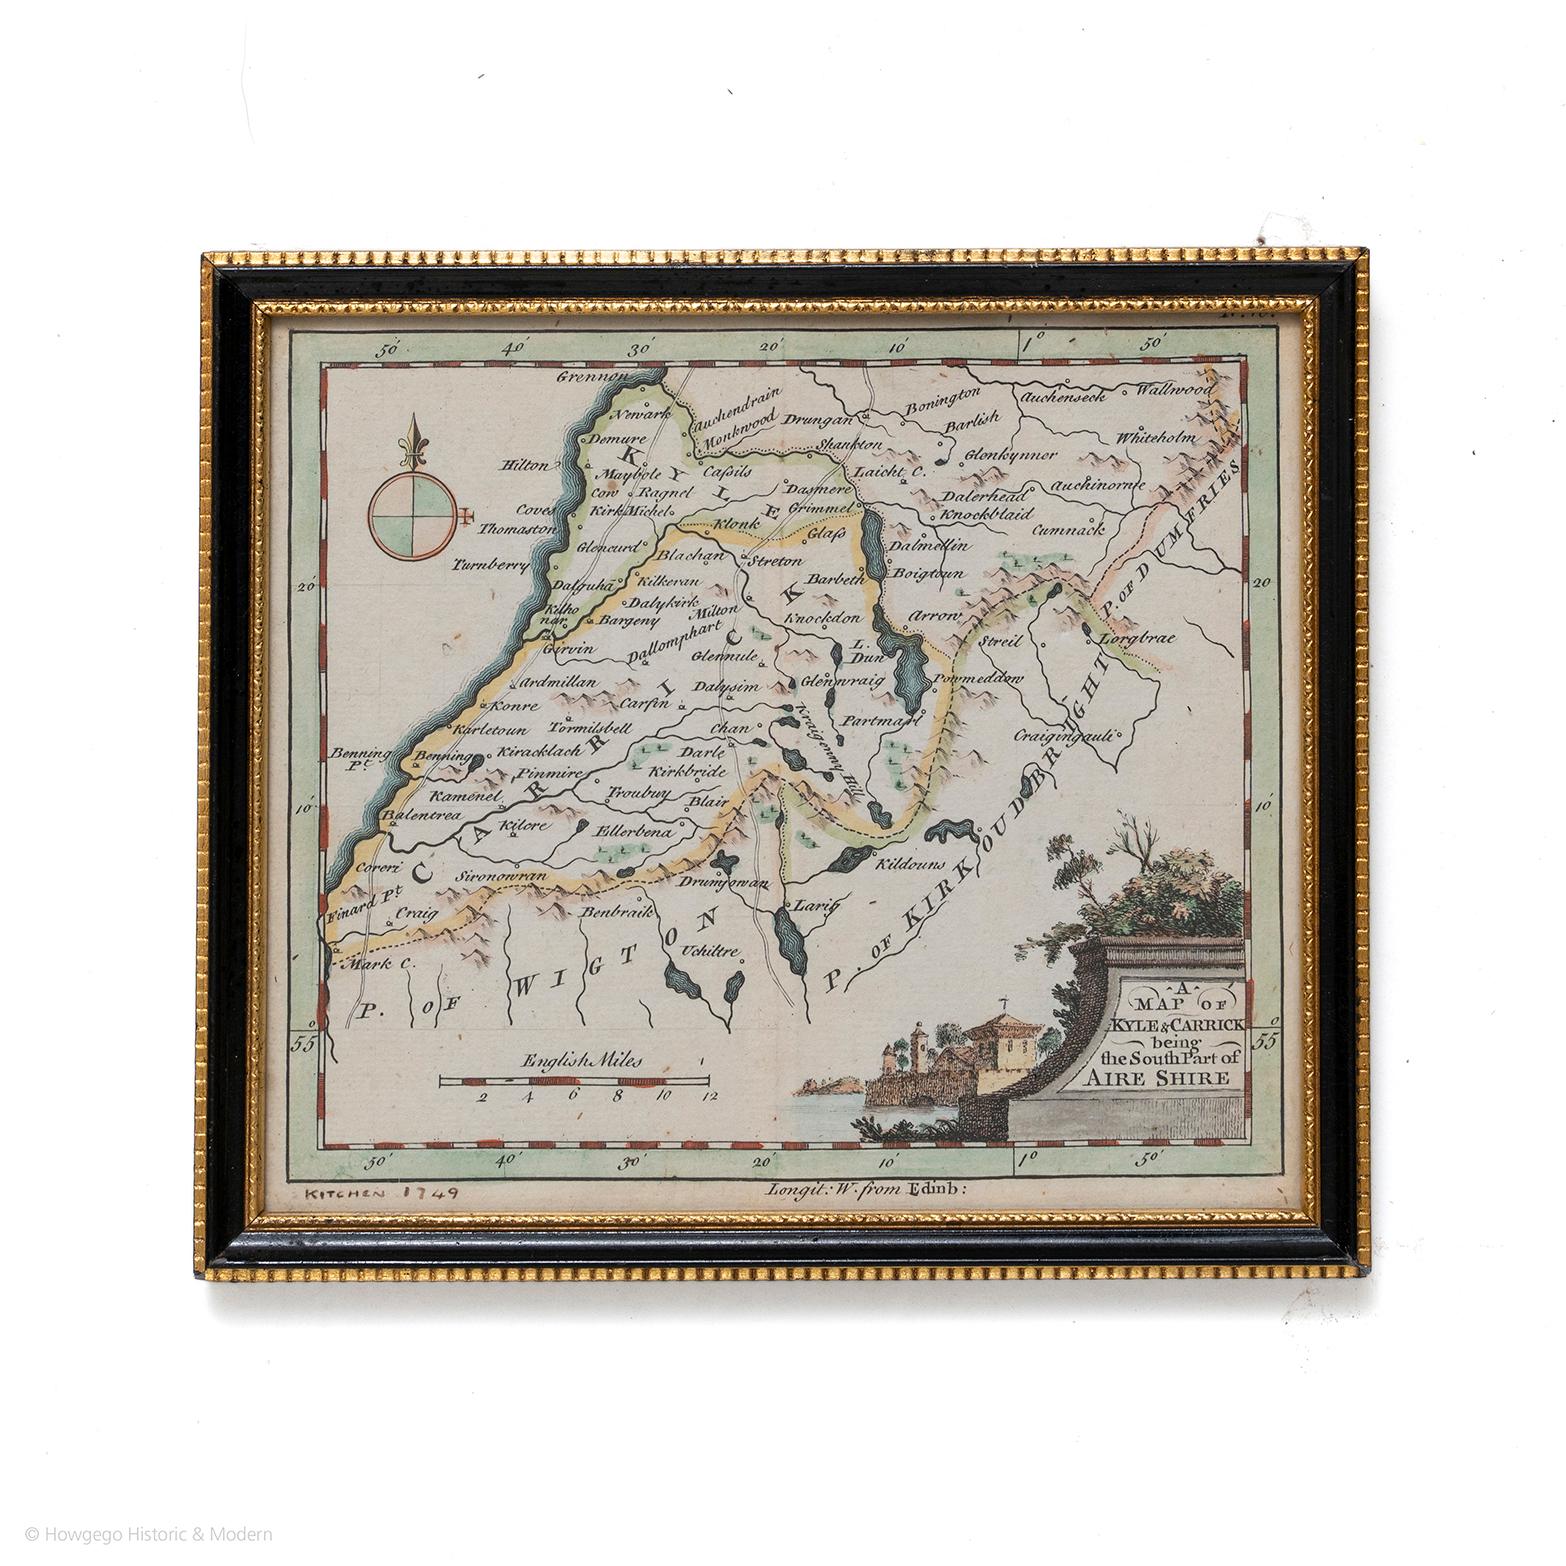 A Map of Kyle & Carrick Aireshire Thomas Kitchen 1749
In original black and gold frame
Just purchased more information to follow

MAKER Thomas Kitchin (1718-1784) English engraver and cartographer, who became hydrographer to the king.